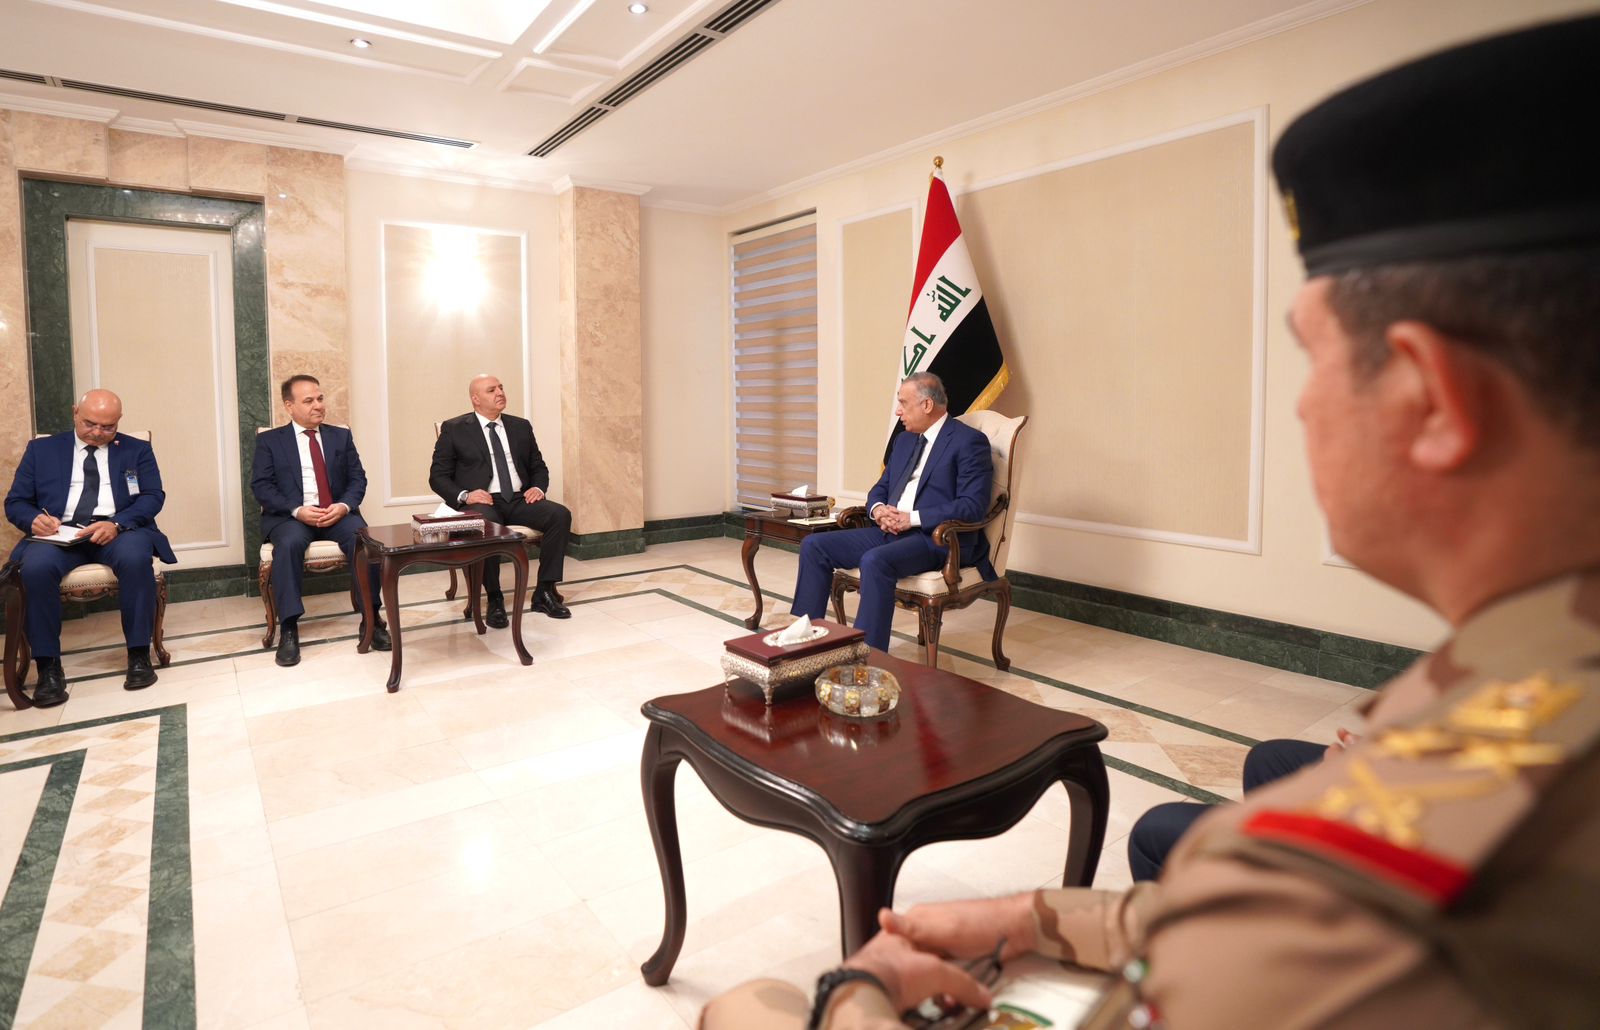 Al-Kadhimi stresses the importance of developing cooperation with Lebanon